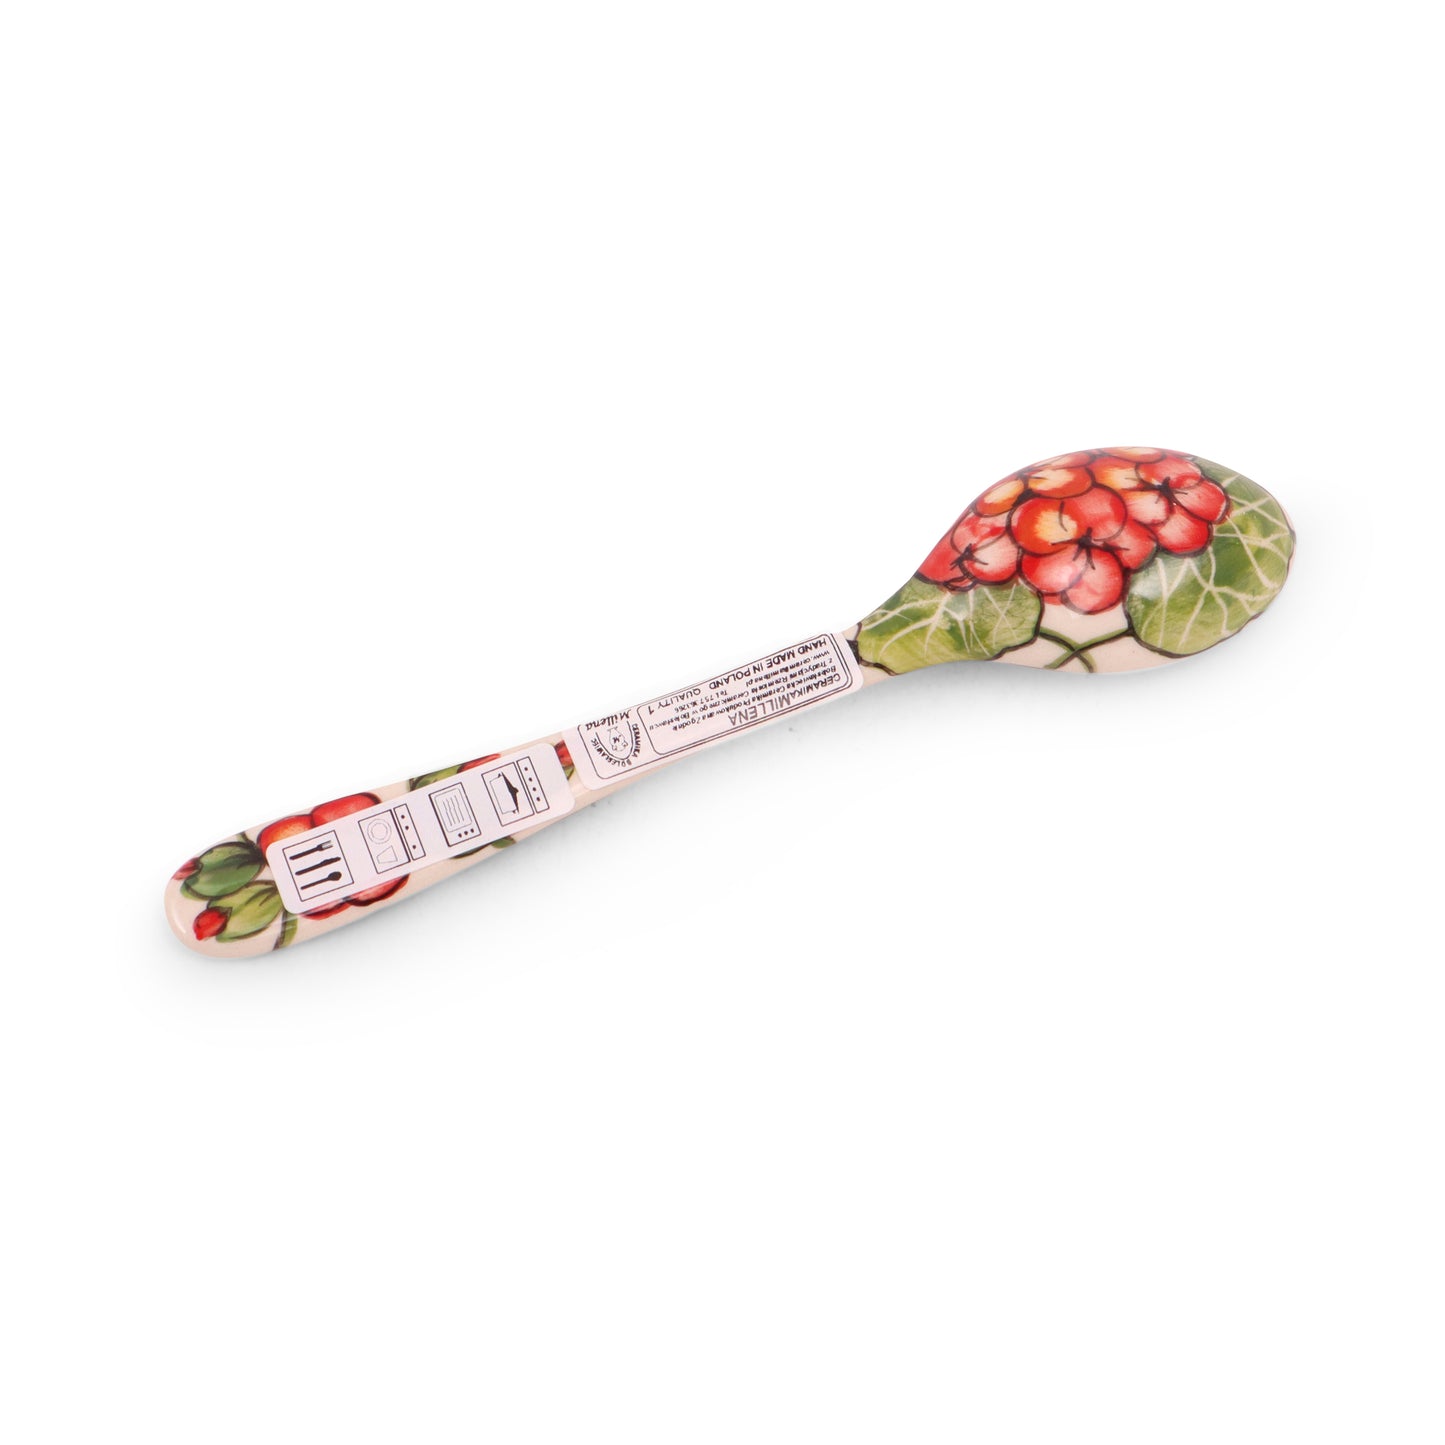 8.5" Tablespoon. Pattern: A49